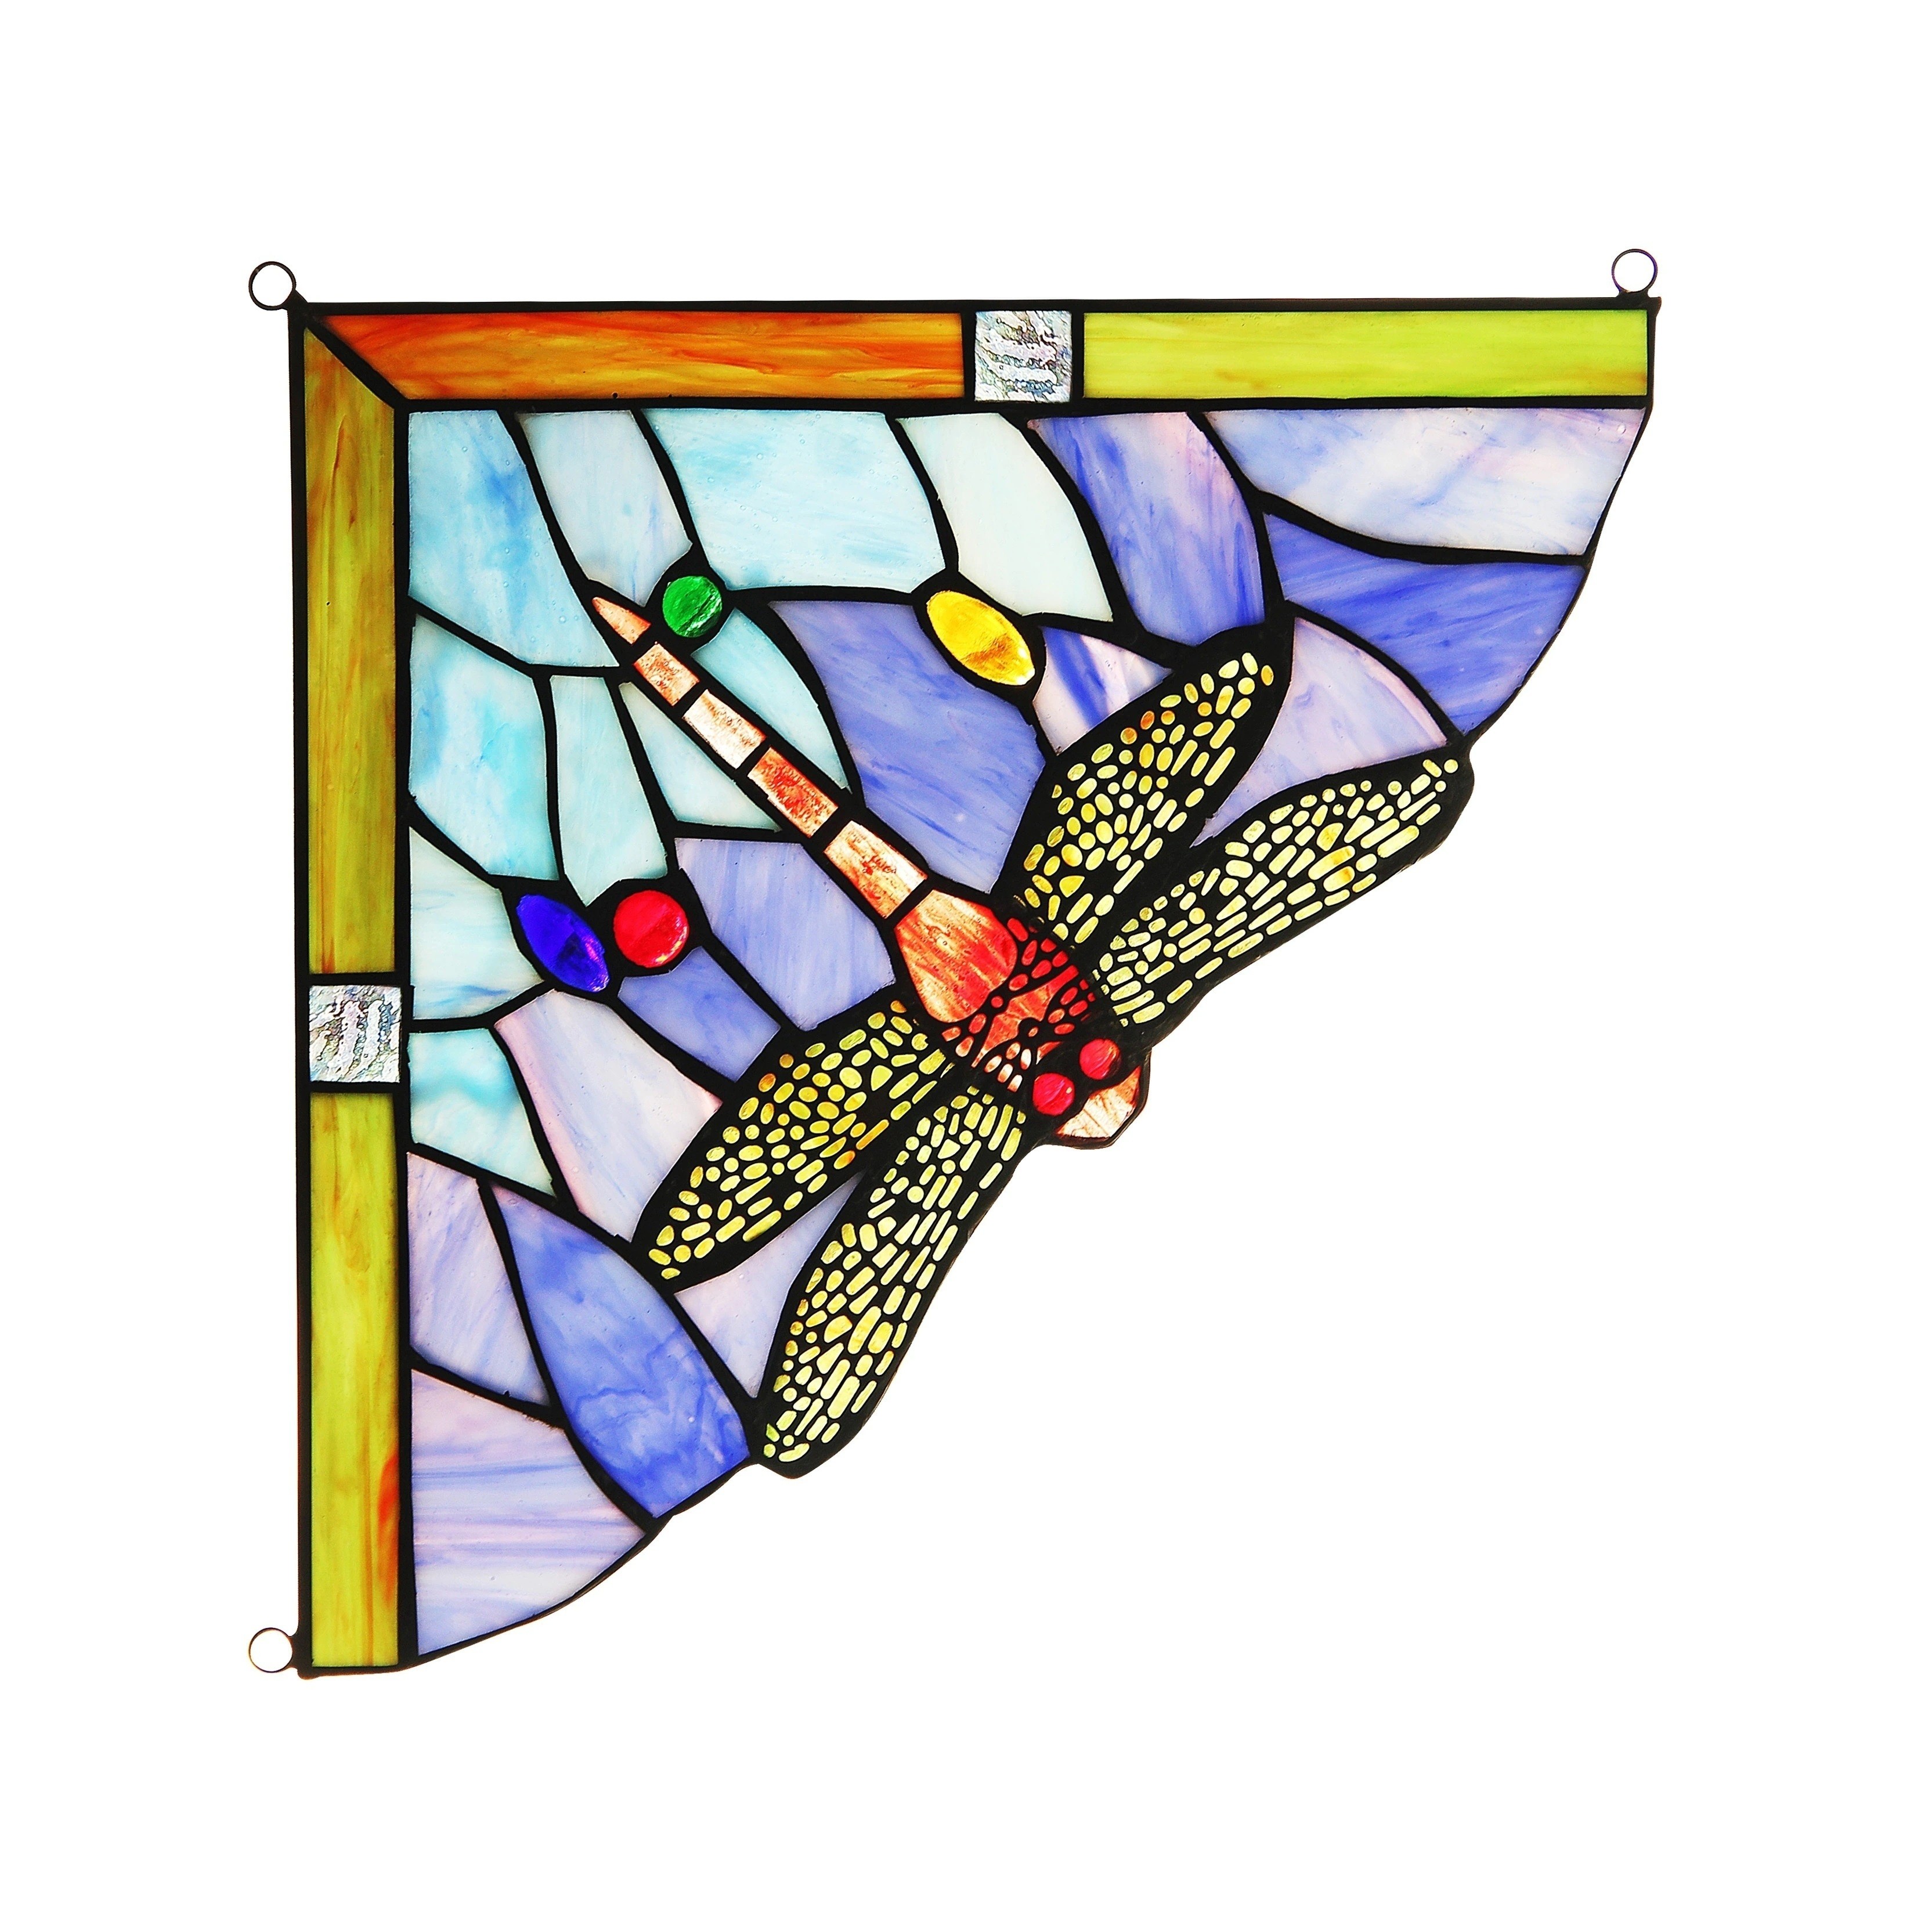 Corner stained glass window hangings